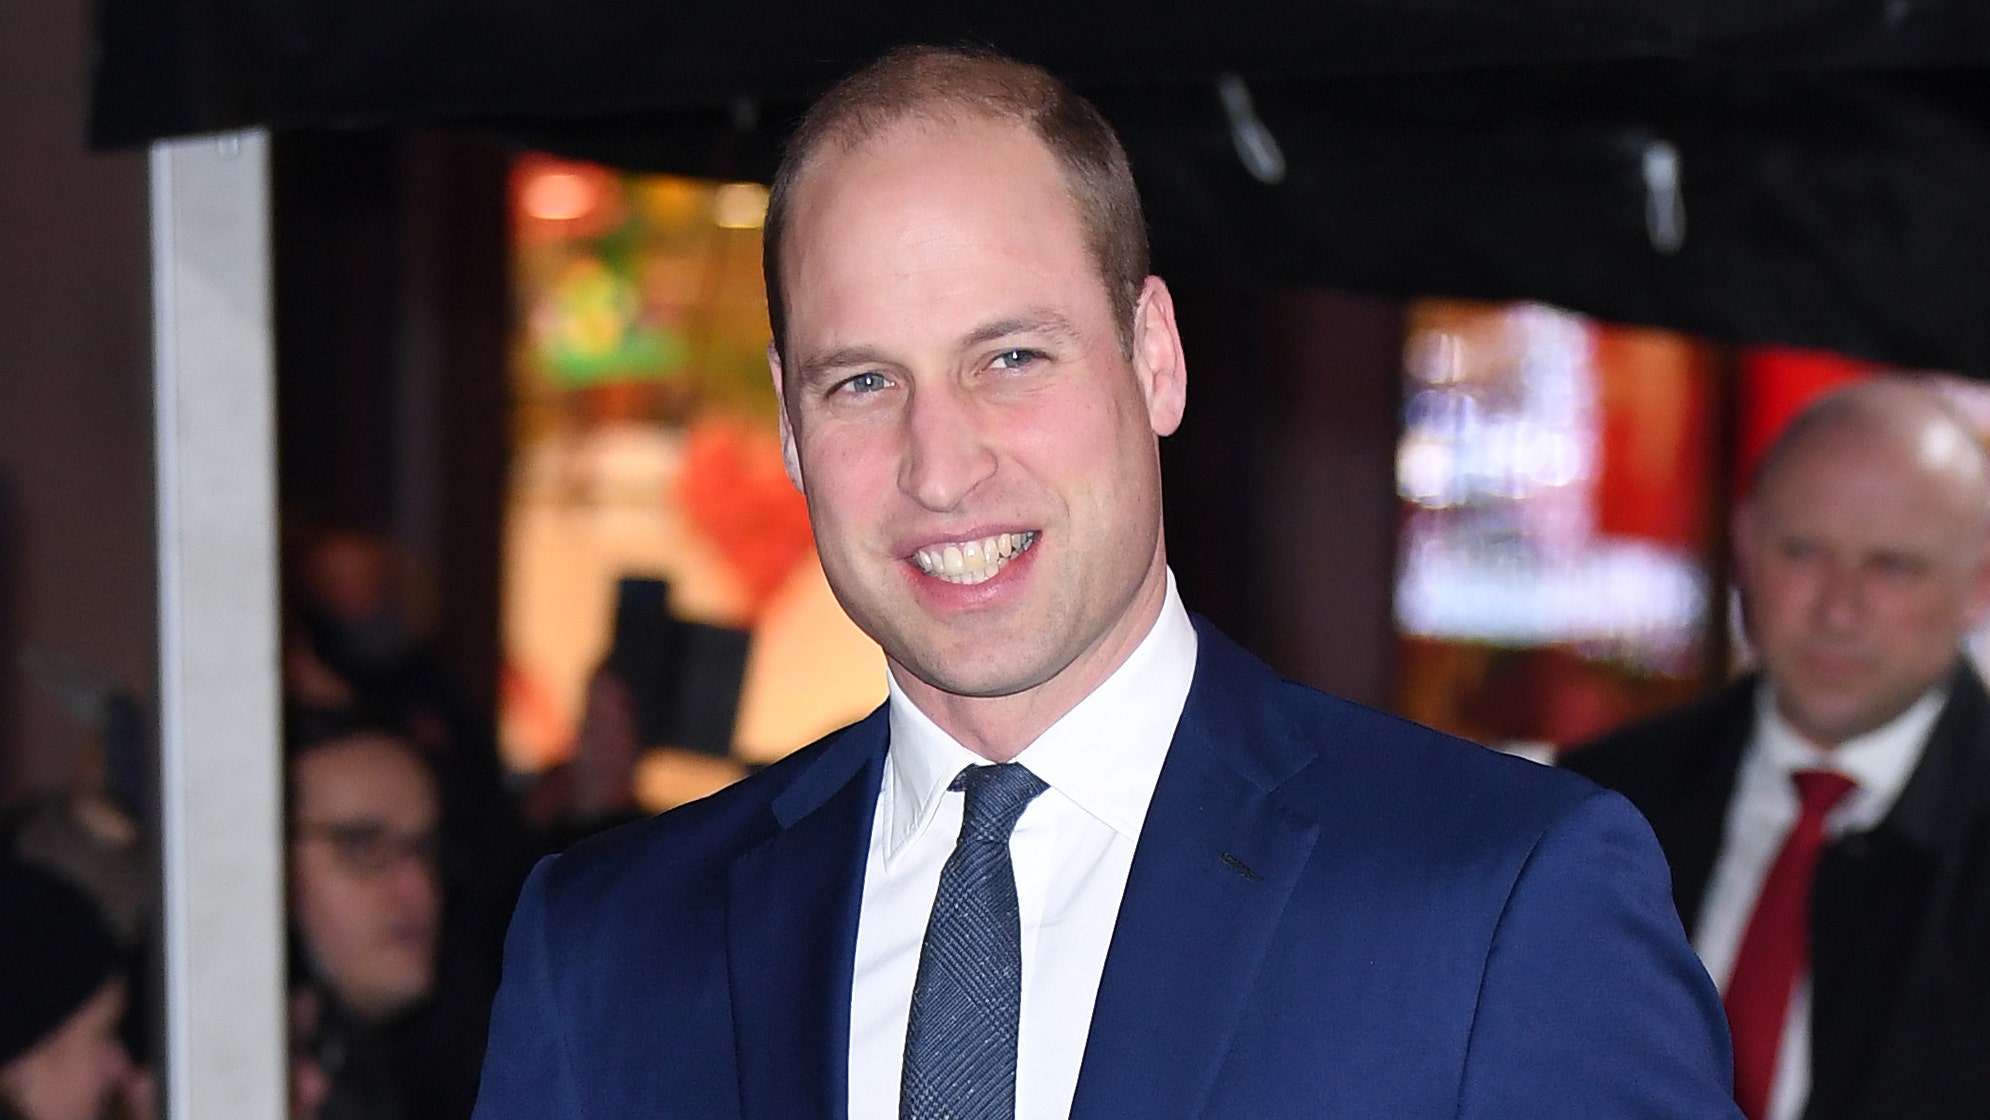 Prince William recounts adorable birthday story about daughter Princess Charlotte